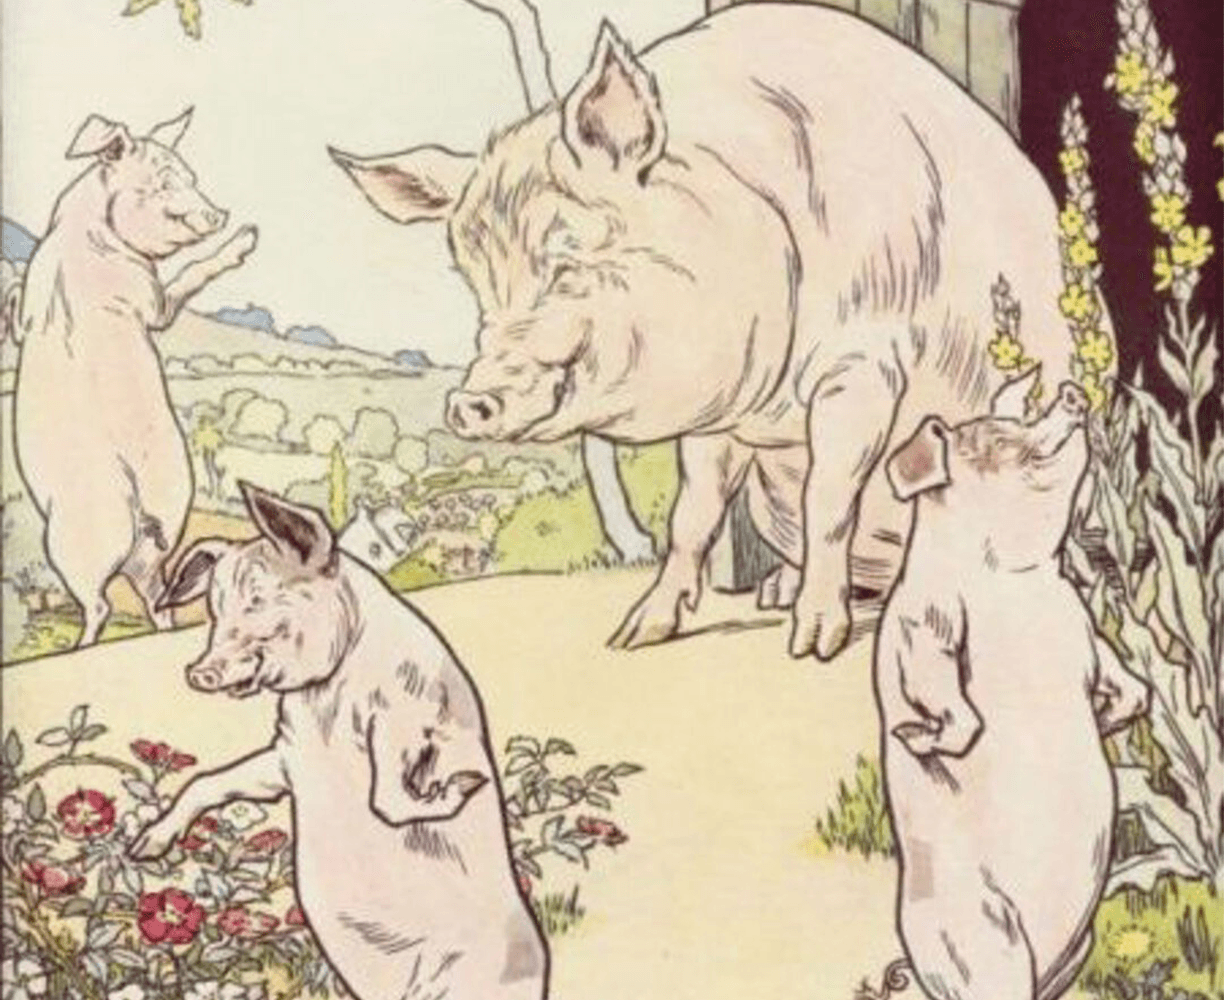 The cover art for the episode The Three Little Pigs #1 from the comics series Treasury of Tales, which is number 46 in the series